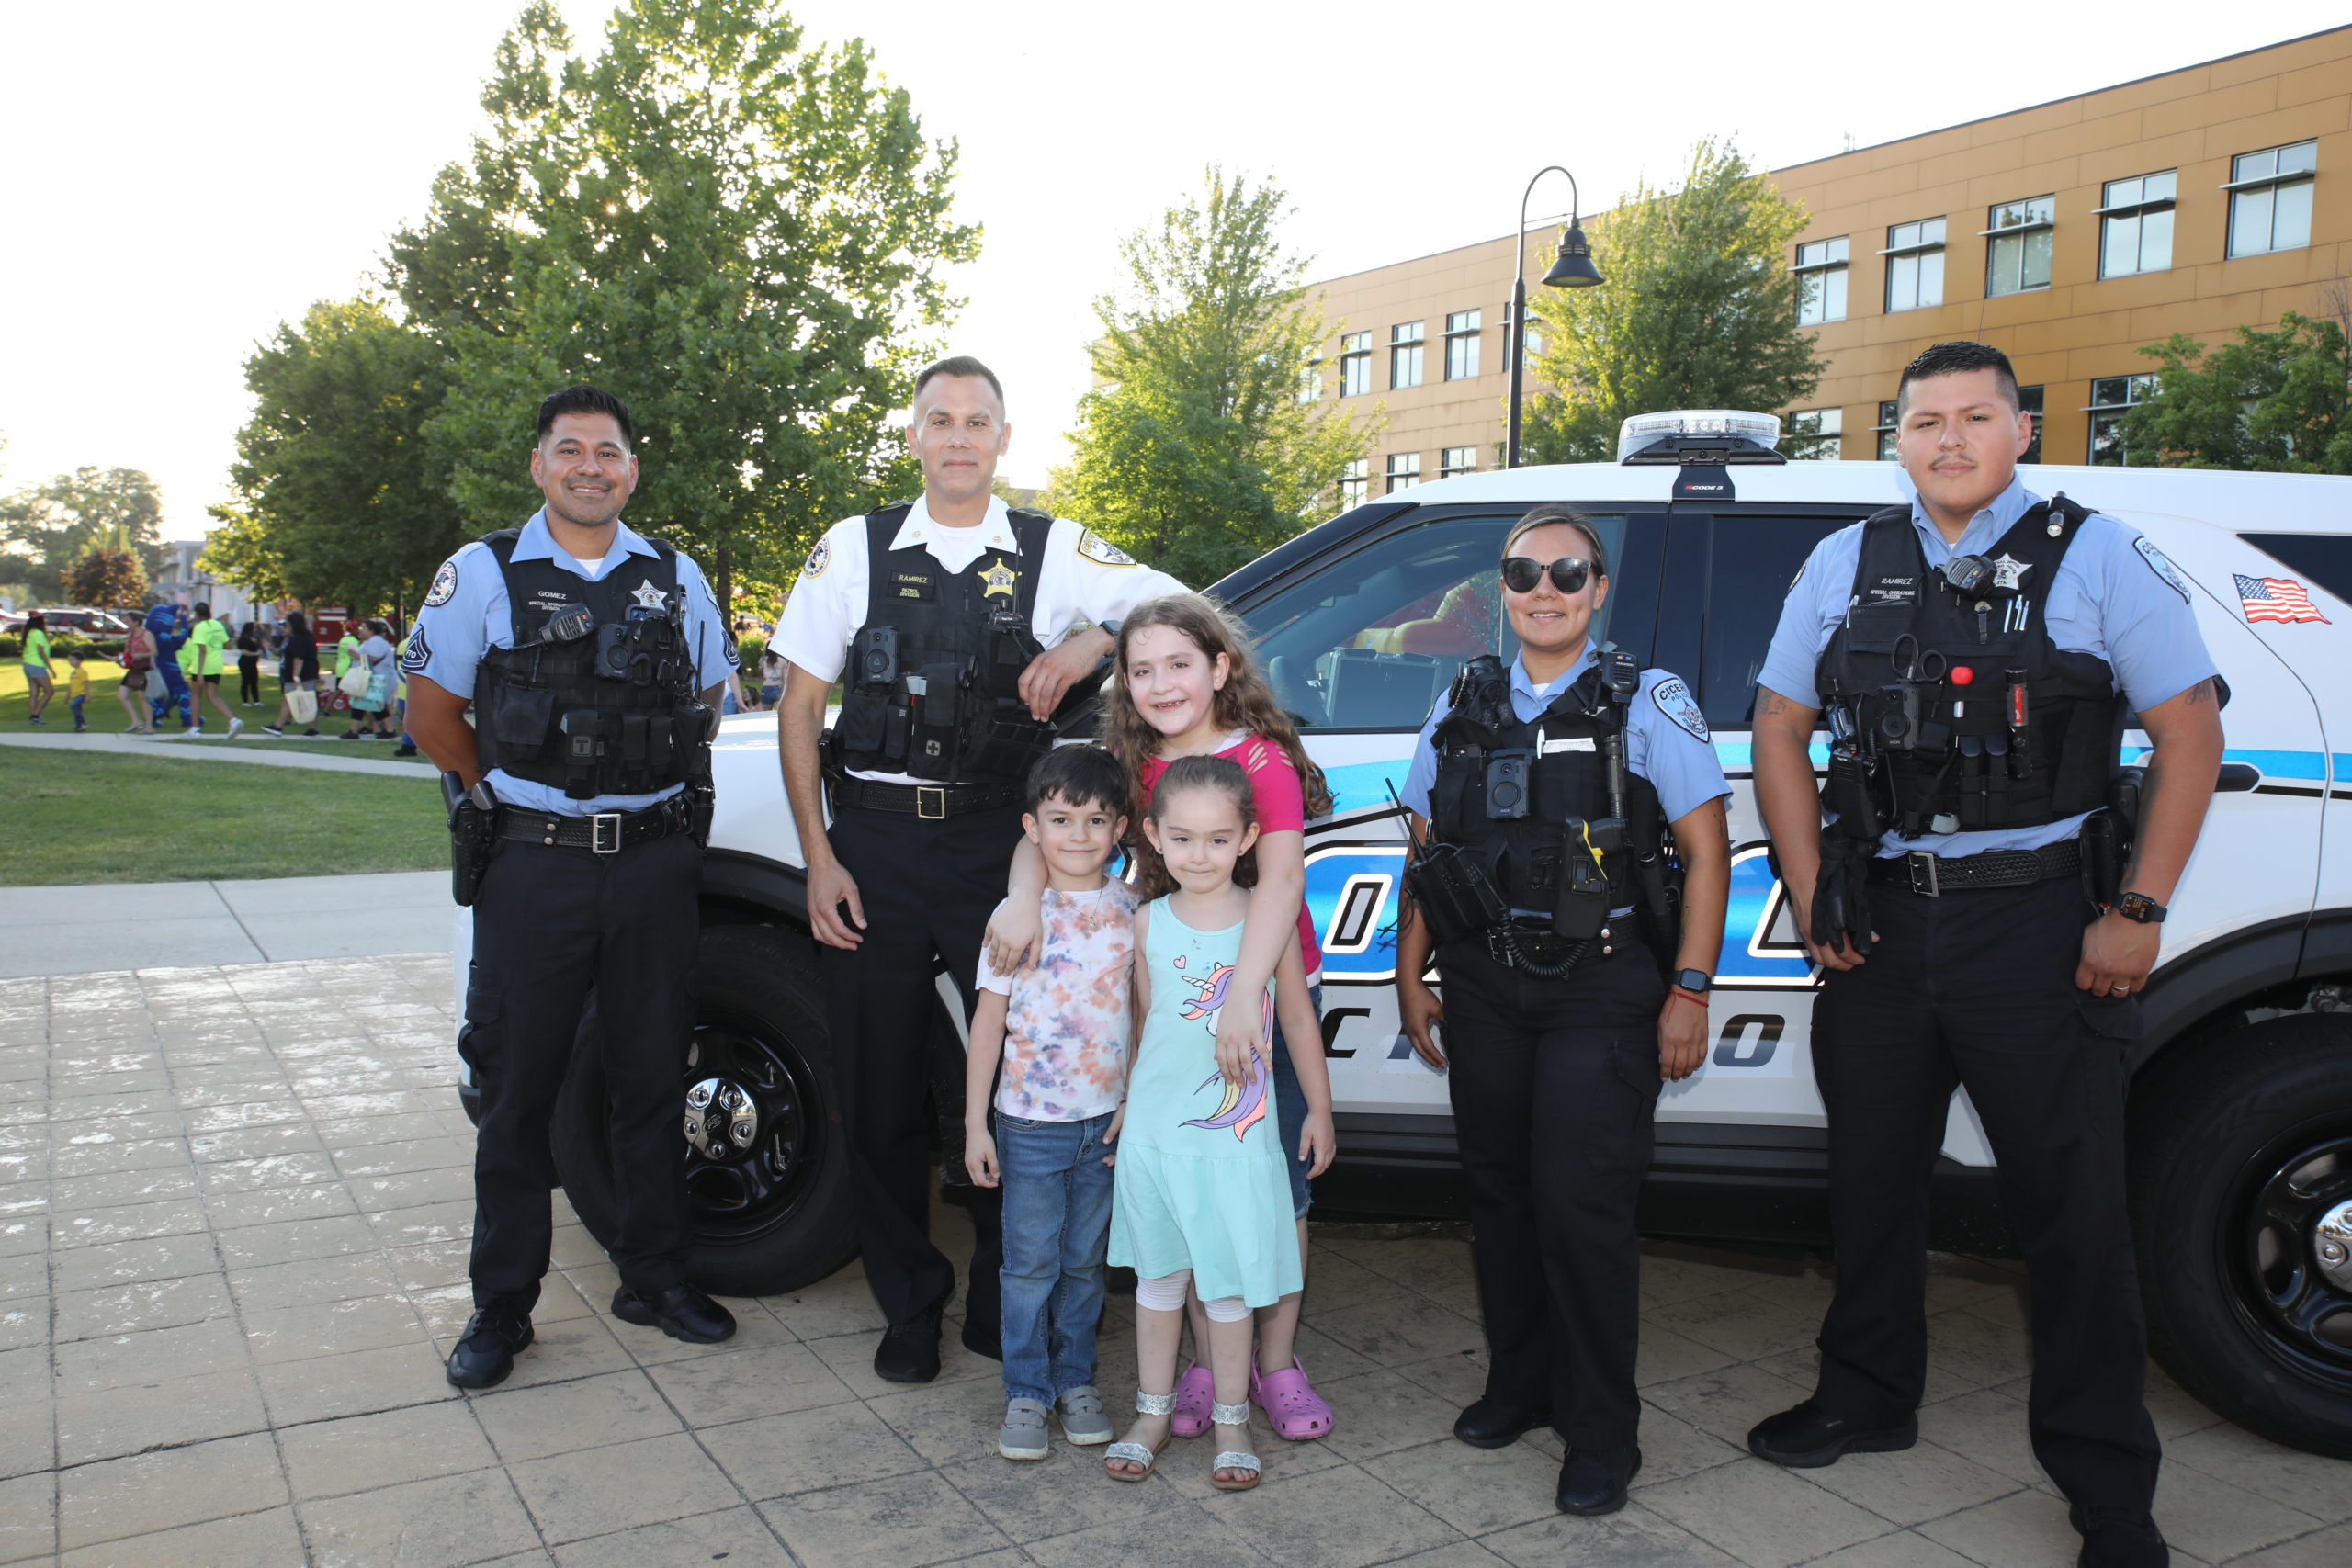 Cicero Police joined community residents to celebrate National Night Out on August 2, 2022